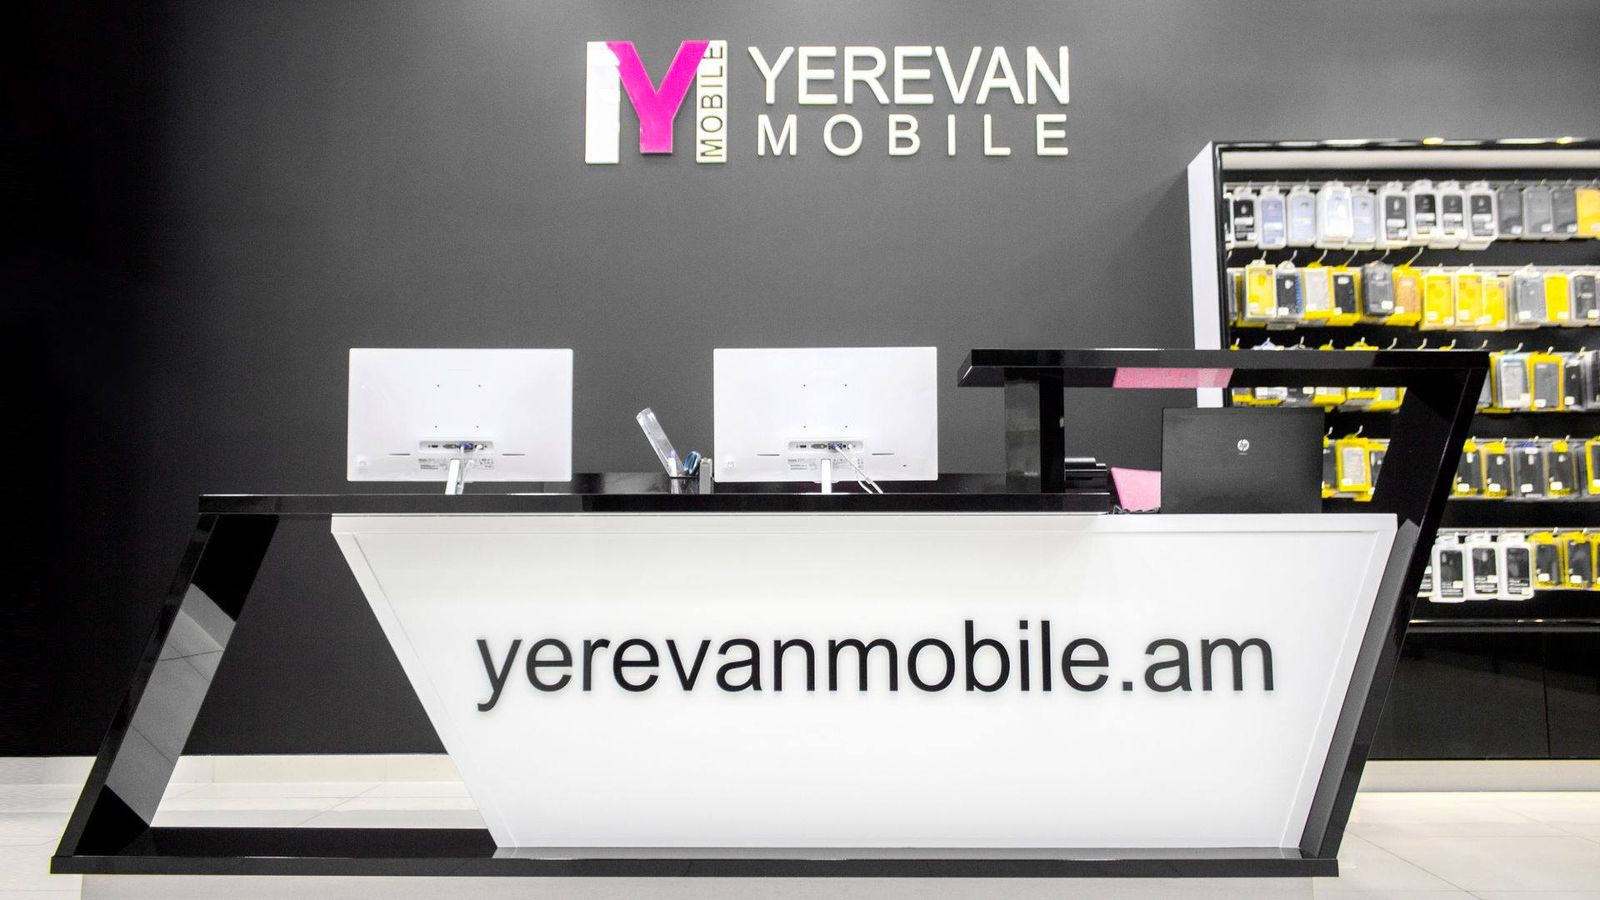 Yerevan Mobile reception desk sign and wall-mounted letters made of acrylic and aluminum